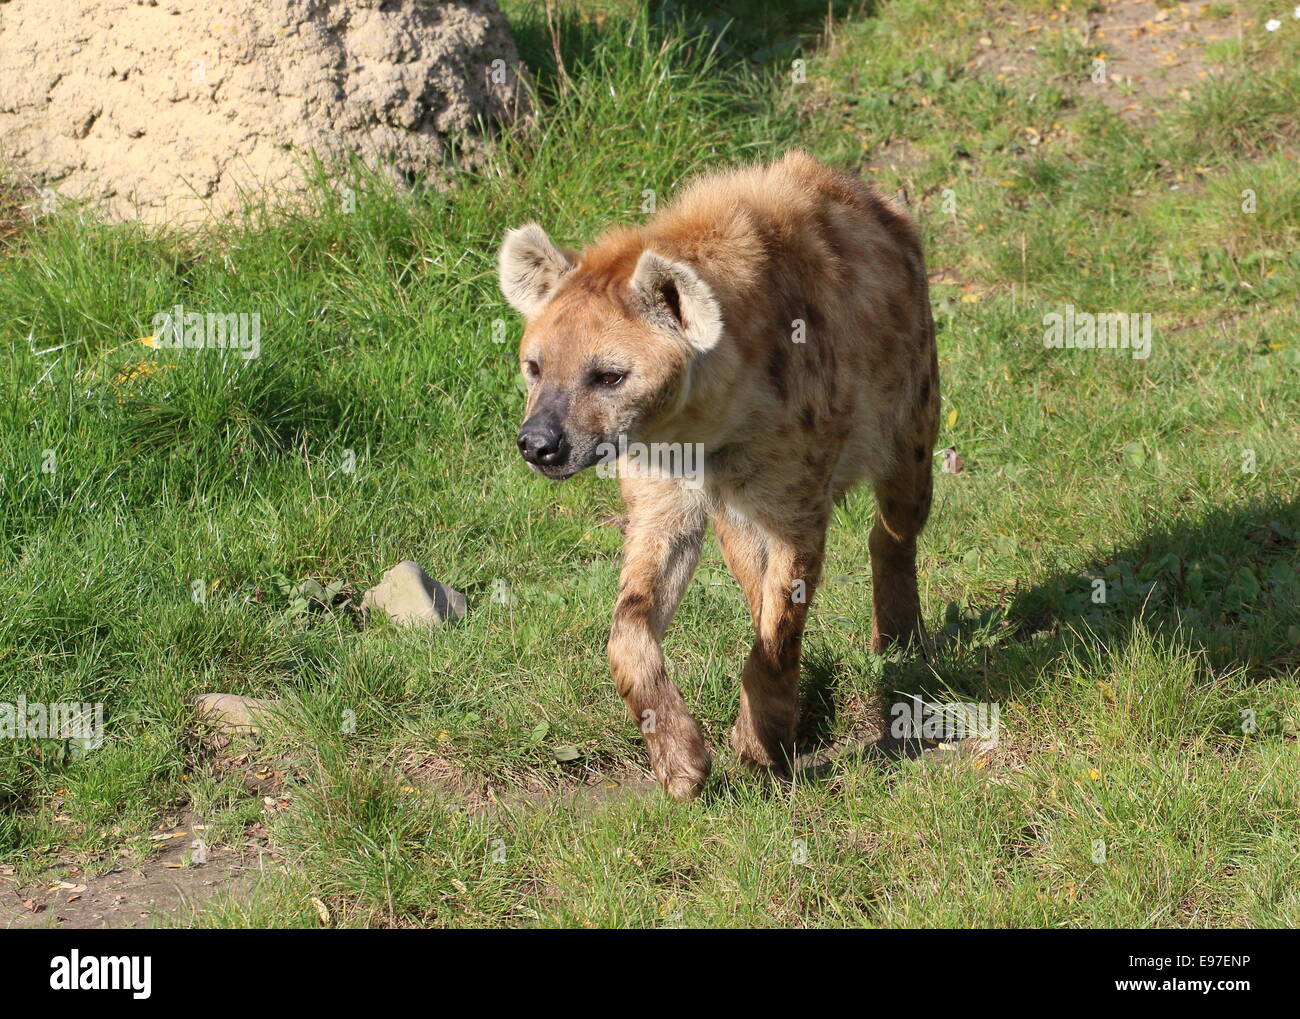 Walking African Spotted or laughing hyena (Crocuta crocuta) in close-up Stock Photo